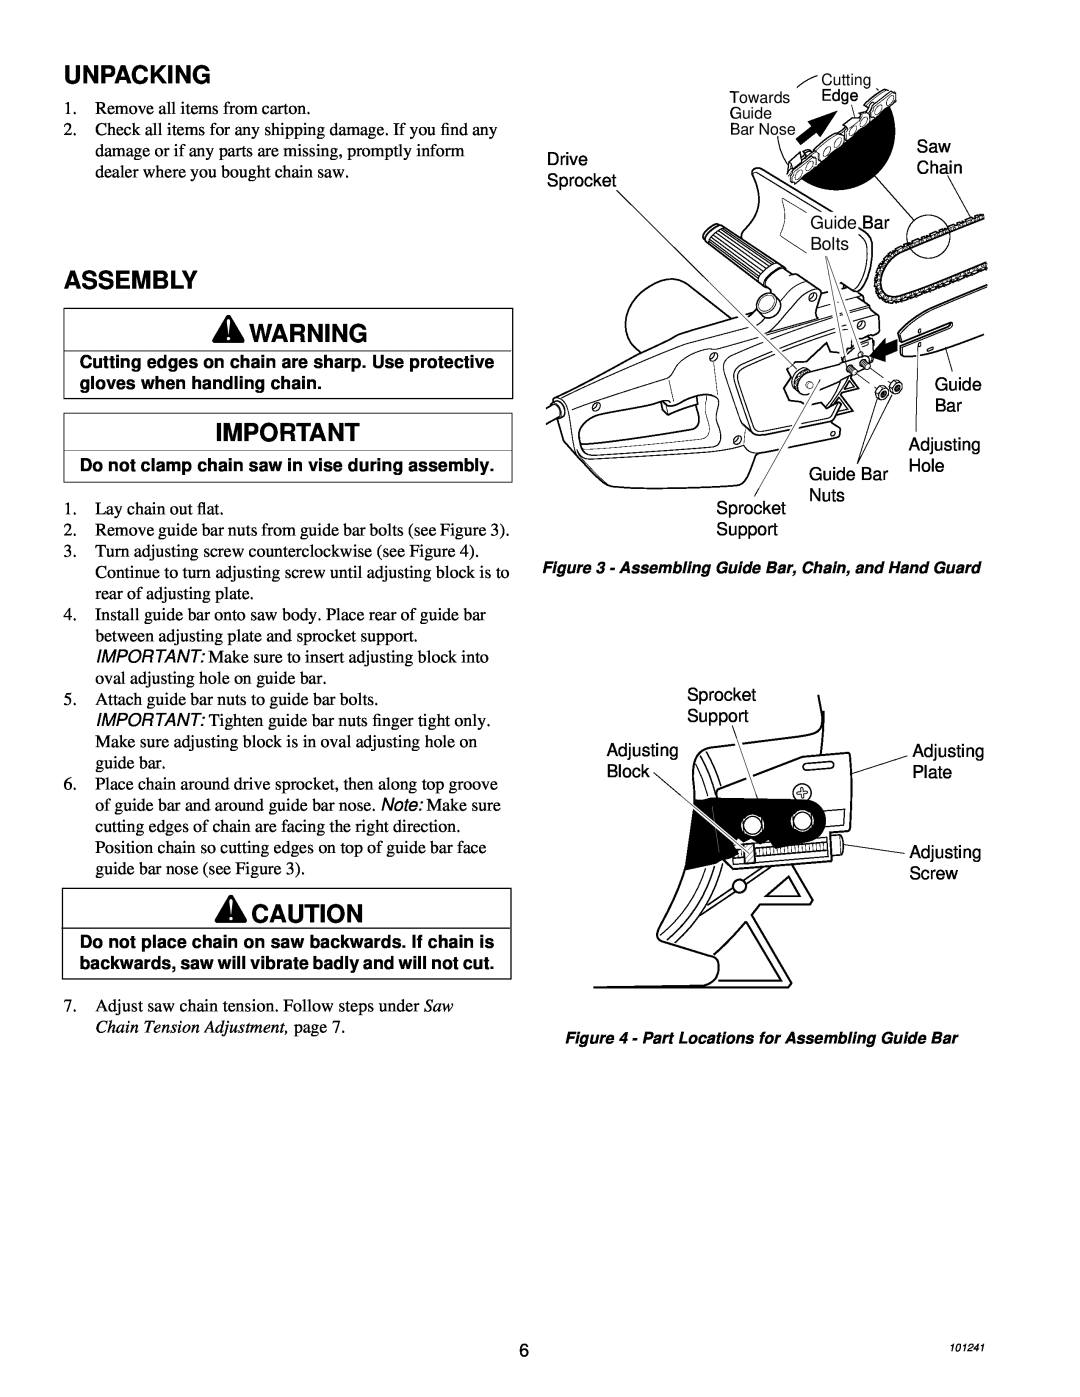 Remington 100582-01, 100582-02 owner manual Unpacking, Assembly, Do not clamp chain saw in vise during assembly 